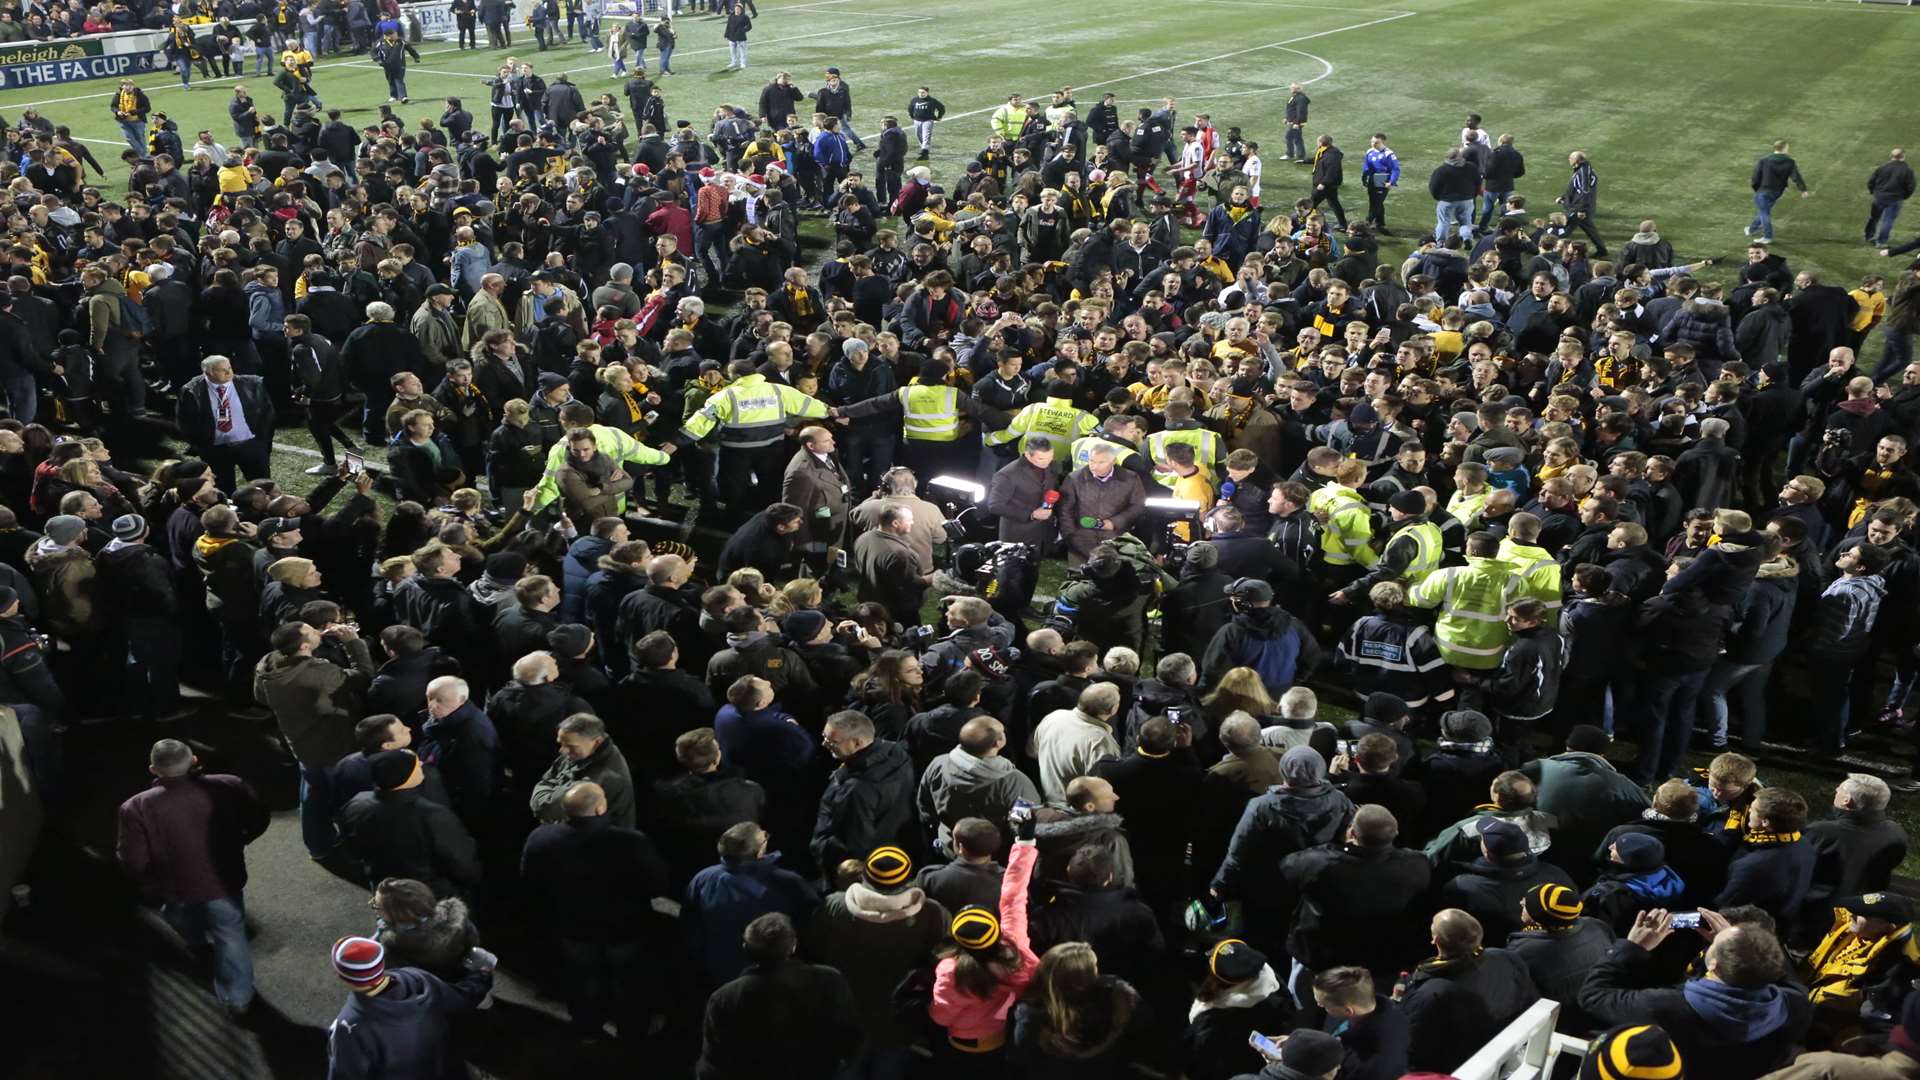 Post-match celebrations at The Gallagher Stadium after Maidstone knock out League 2 Stevenage. Picture: Martin Apps